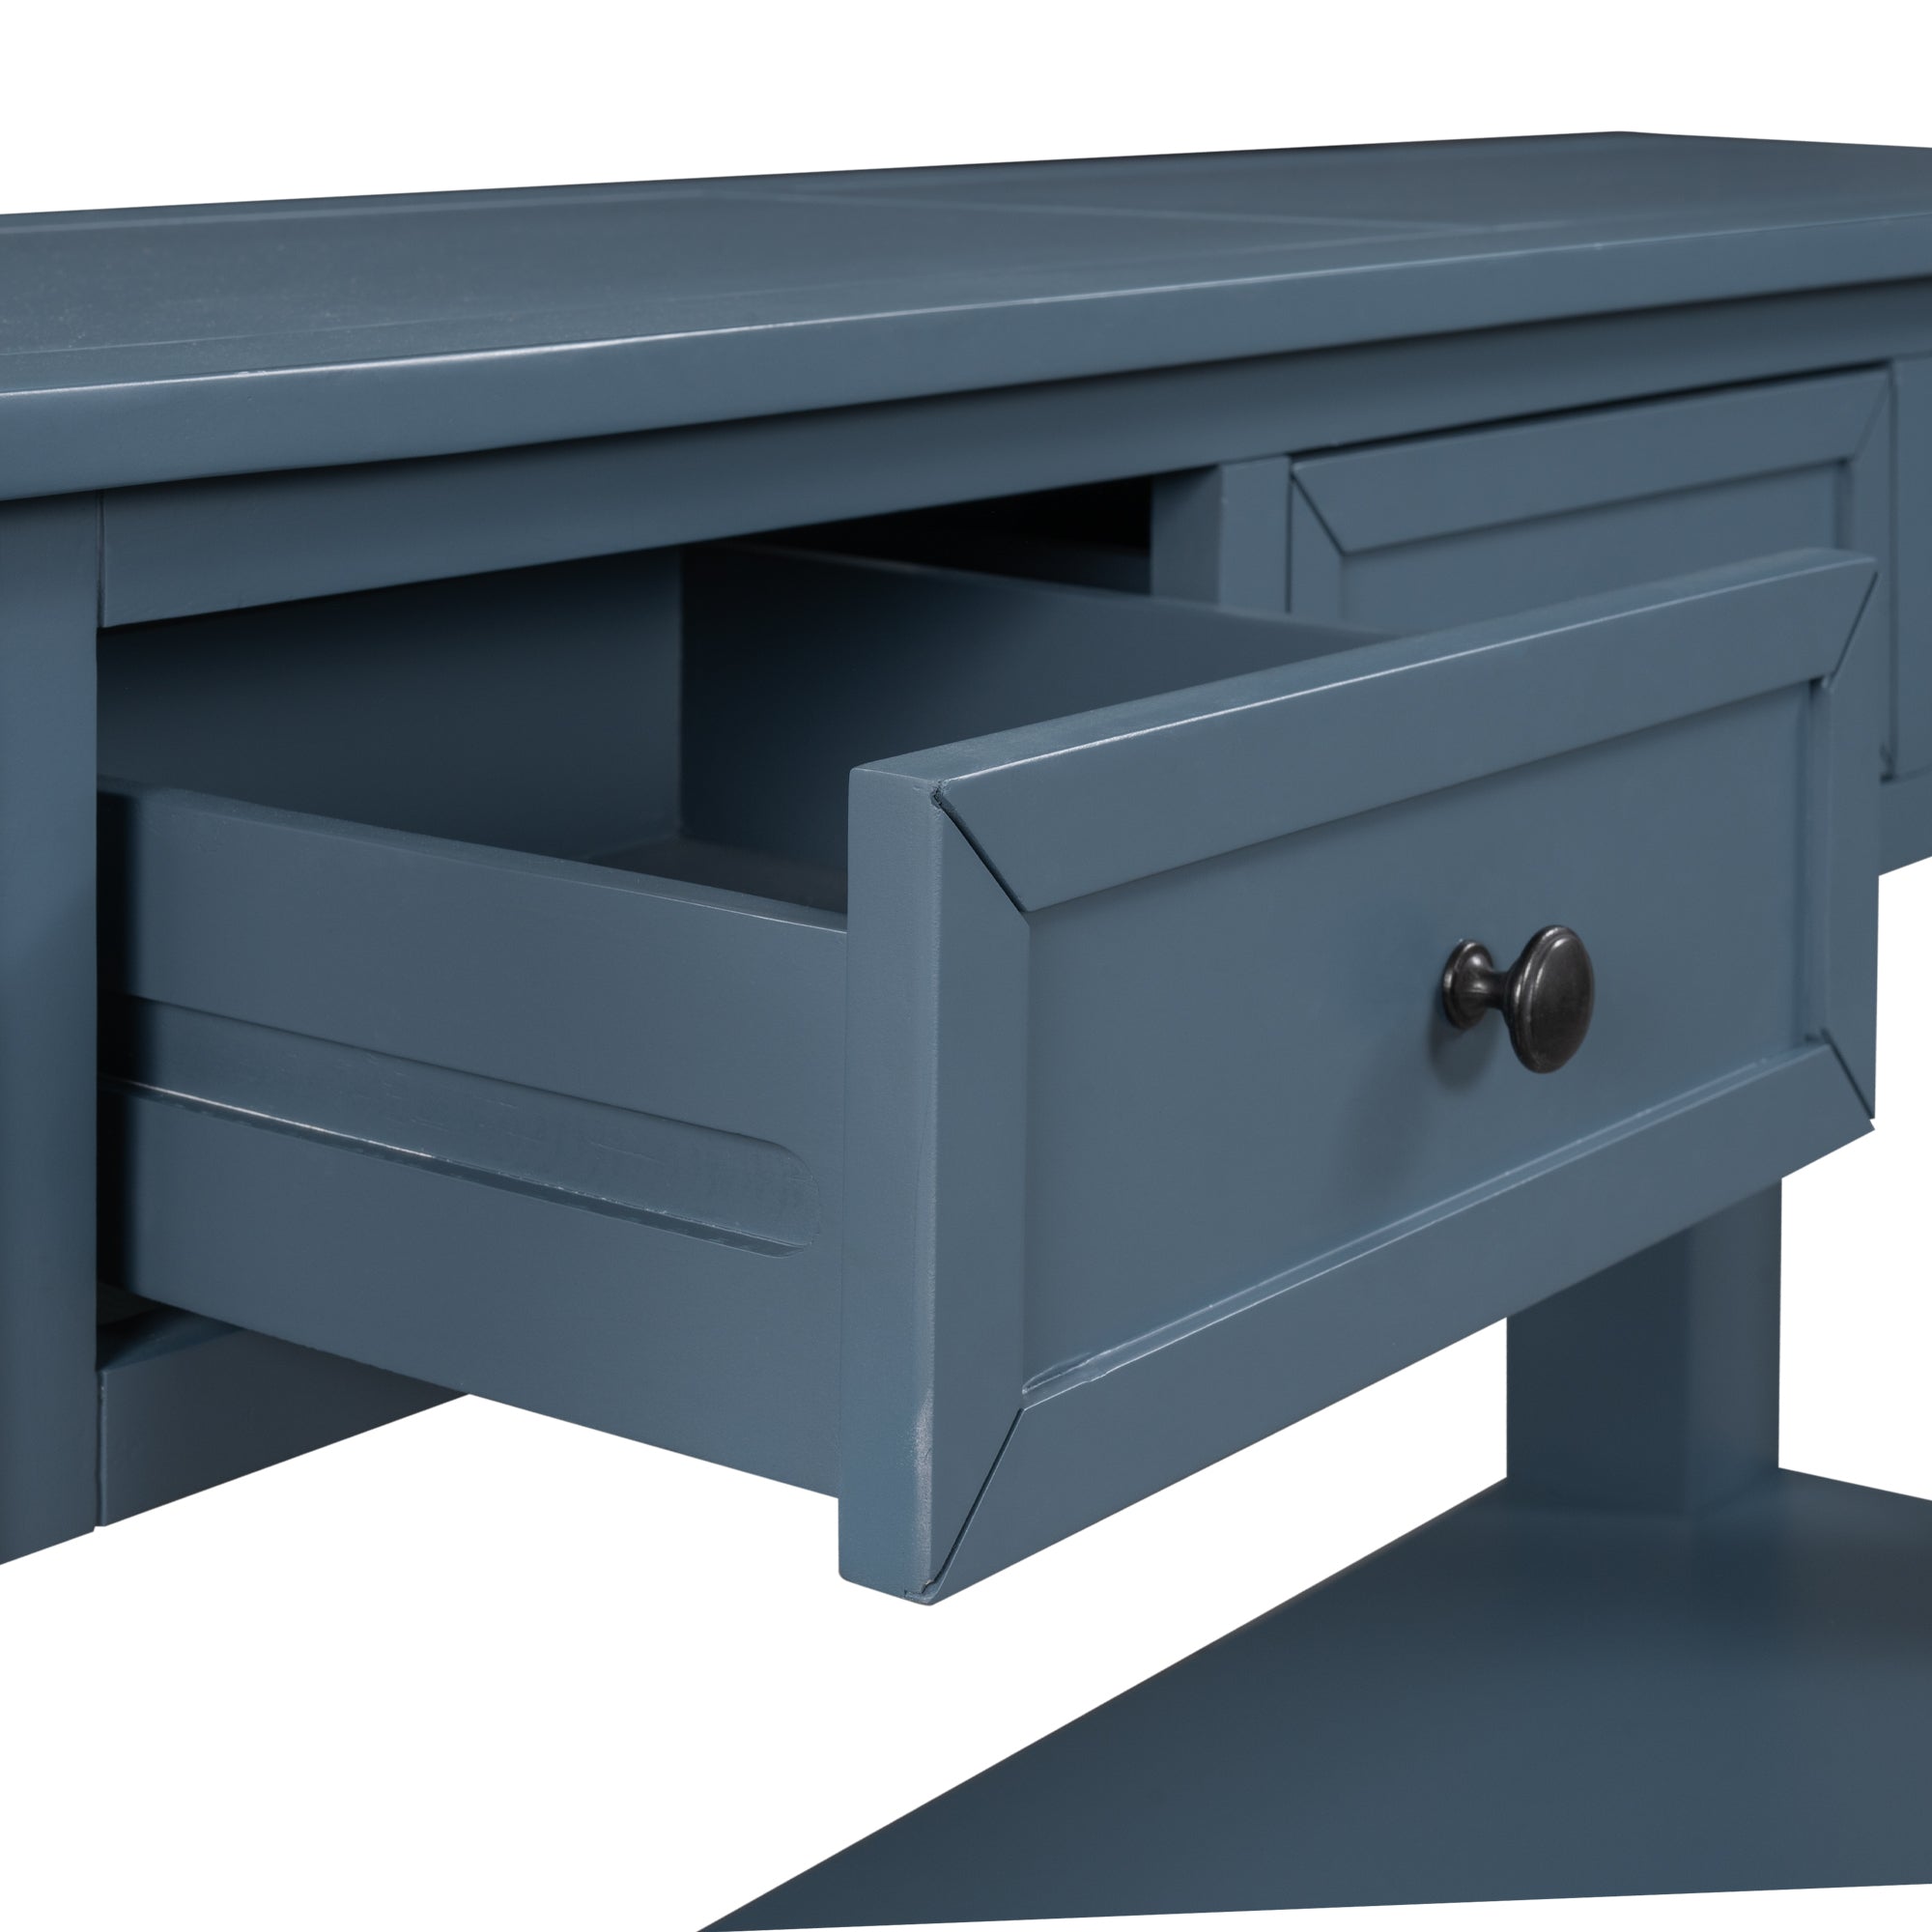 55'' Modern Console Table Sofa Table for Living Room with 3 Drawers and 1 Shelf (Blue)